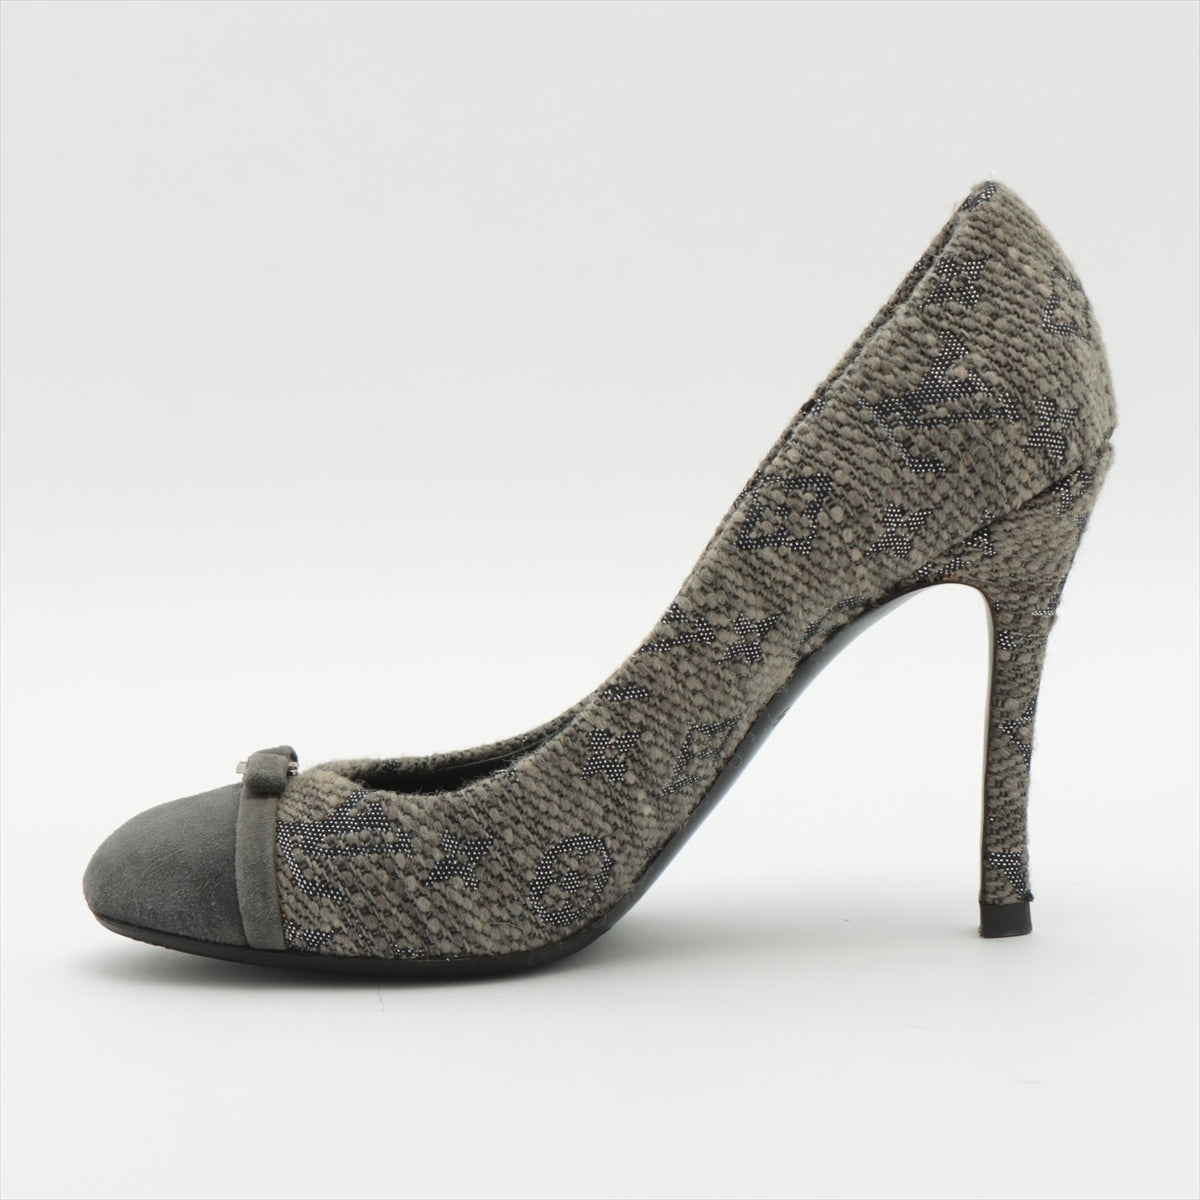 Louis Vuitton Tweed Pumps 38 1/2 Ladies' Grey TC0153 toes There are threads on insoles etc.